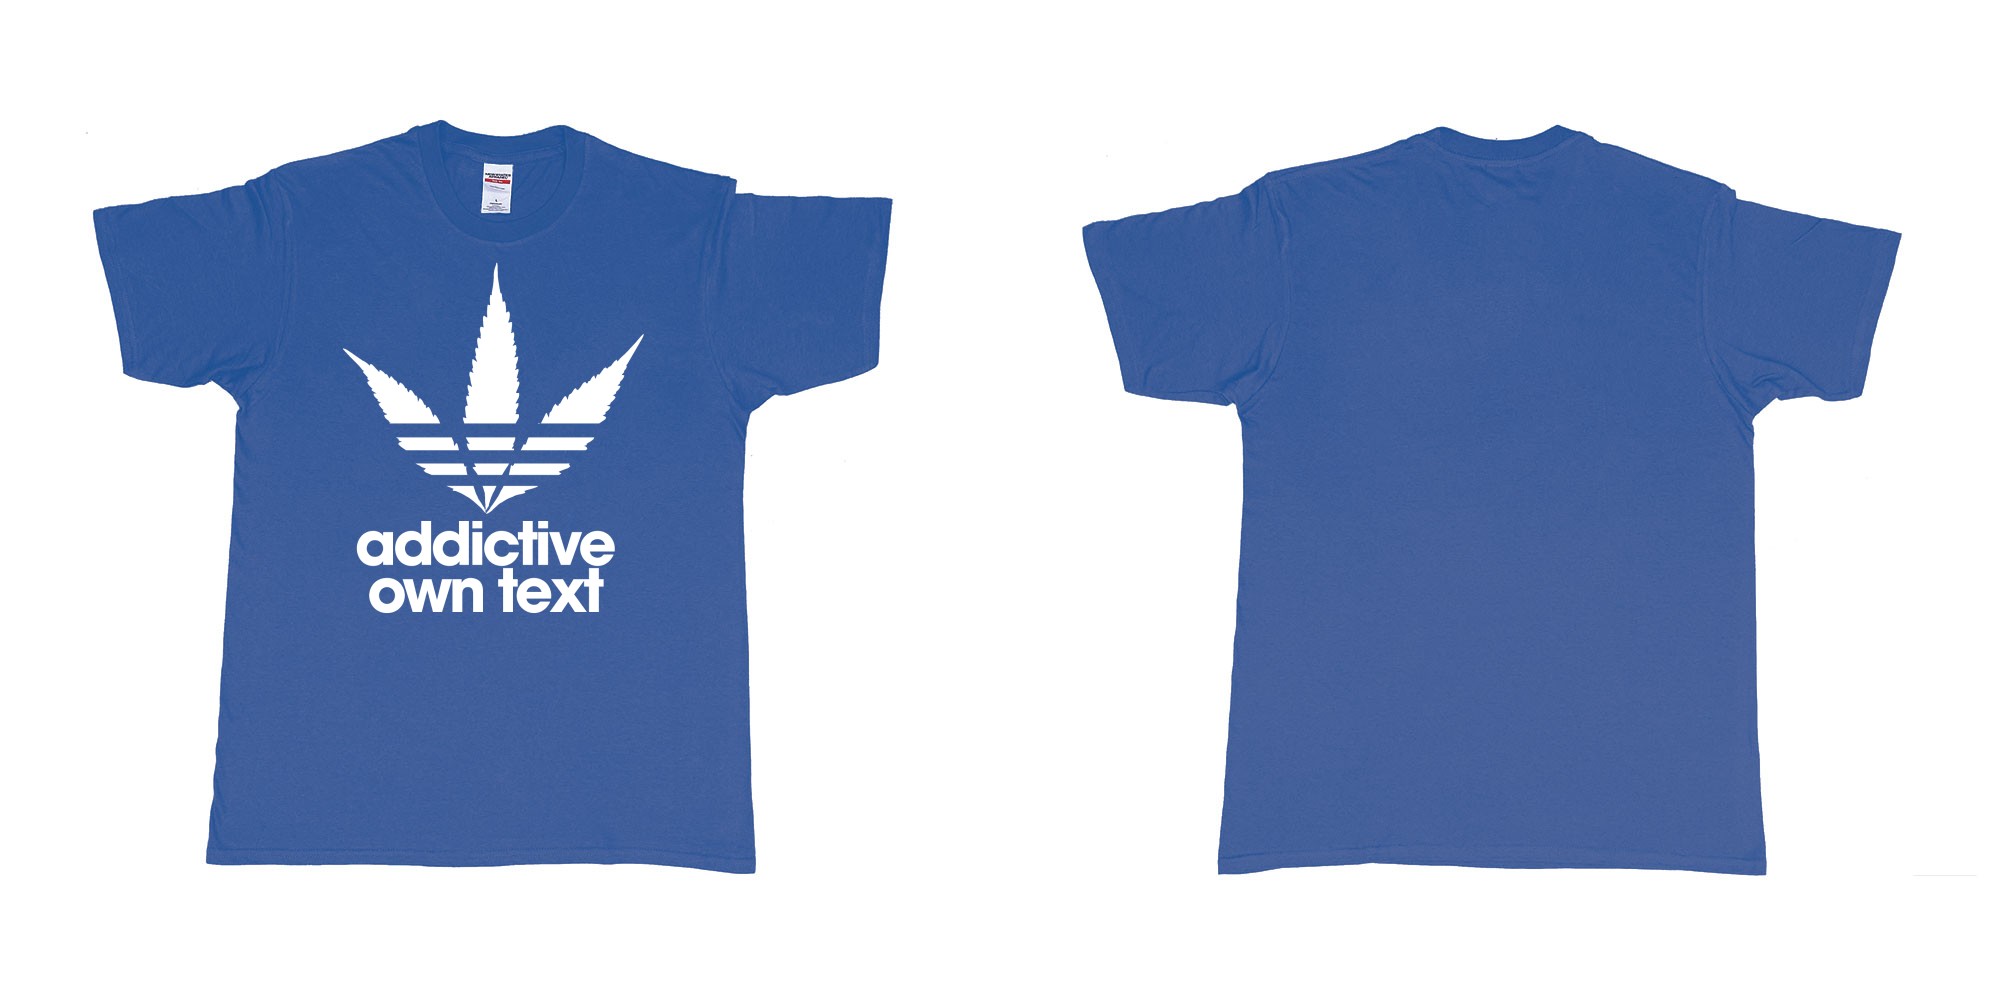 Custom tshirt design adidas ganja addictive own custom printed text in fabric color royal-blue choice your own text made in Bali by The Pirate Way